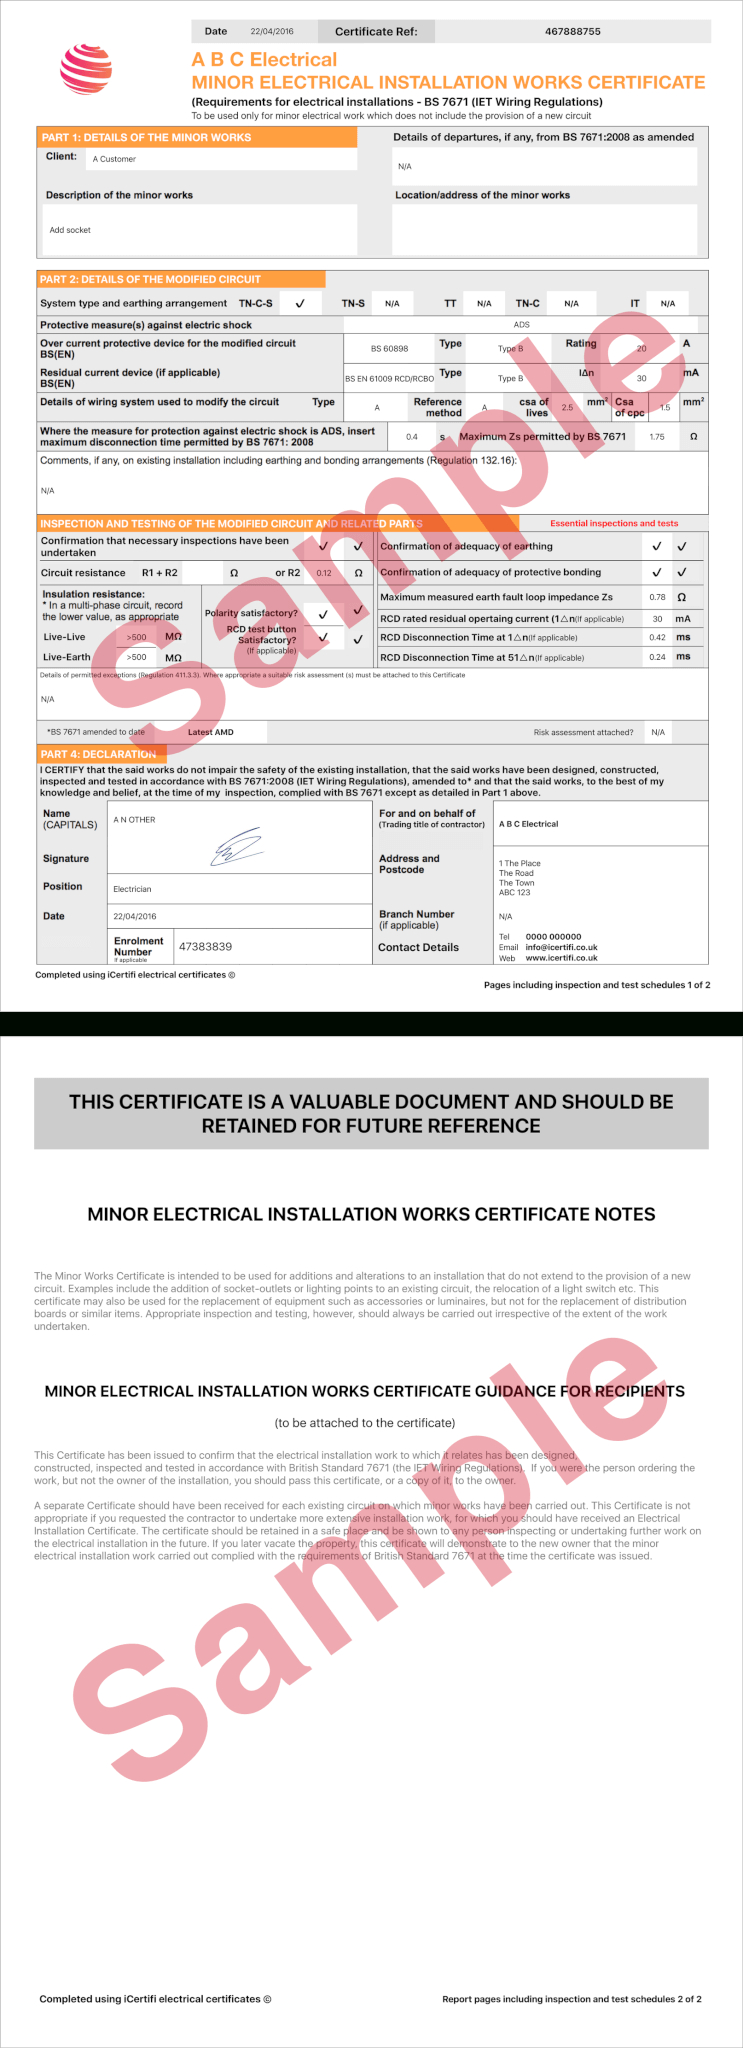 Electrical Certificate  Example Minor Works Certificate  Icertifi regarding Electrical Minor Works Certificate Template